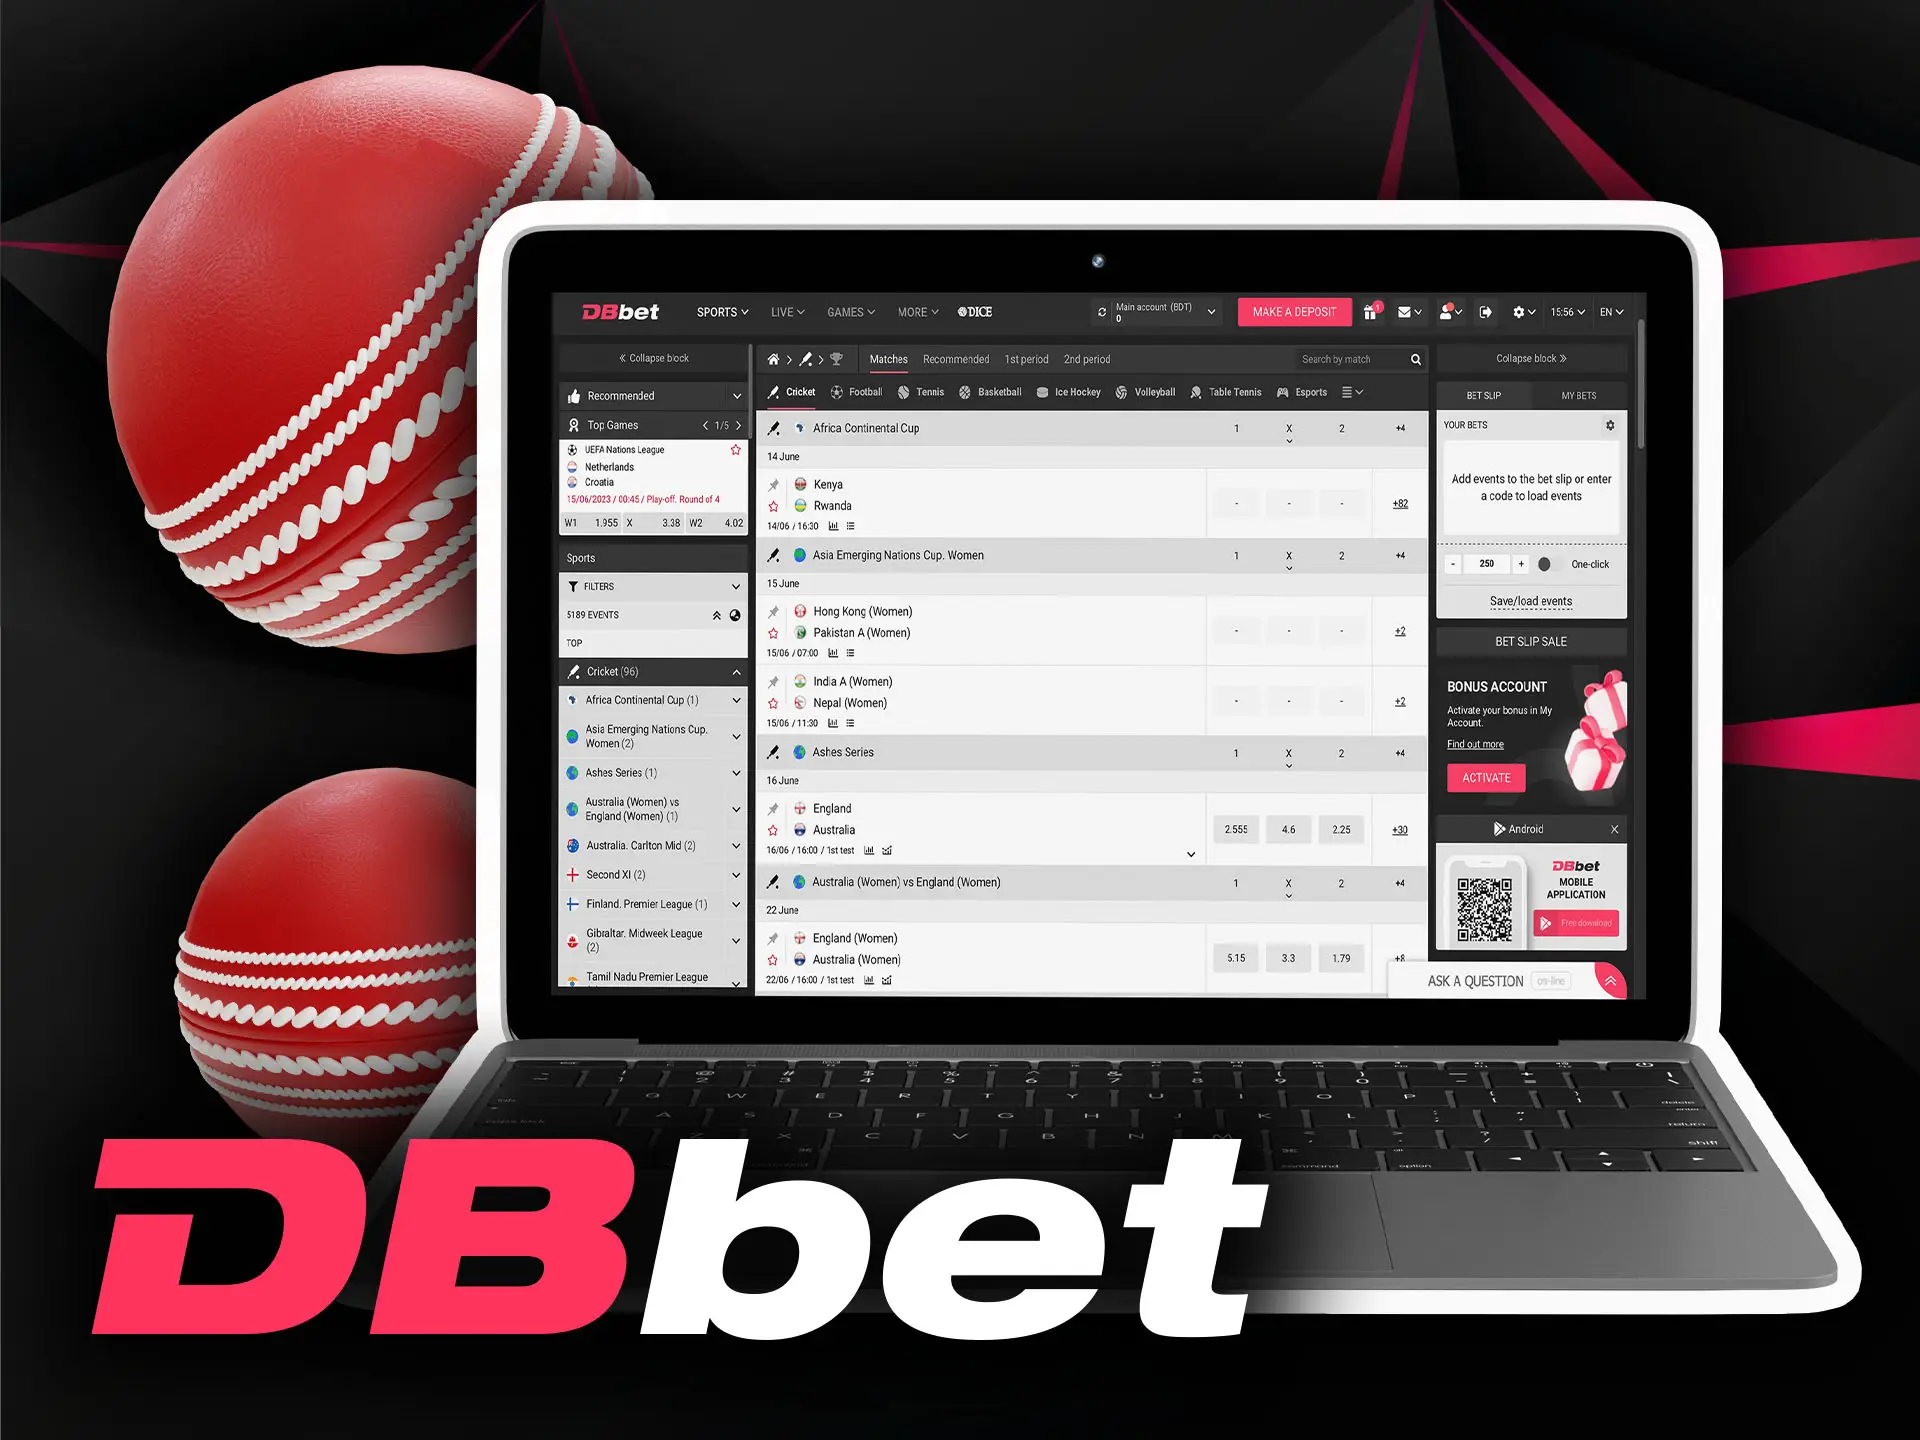 Place bets on cricket in the DBbet sportsbook.